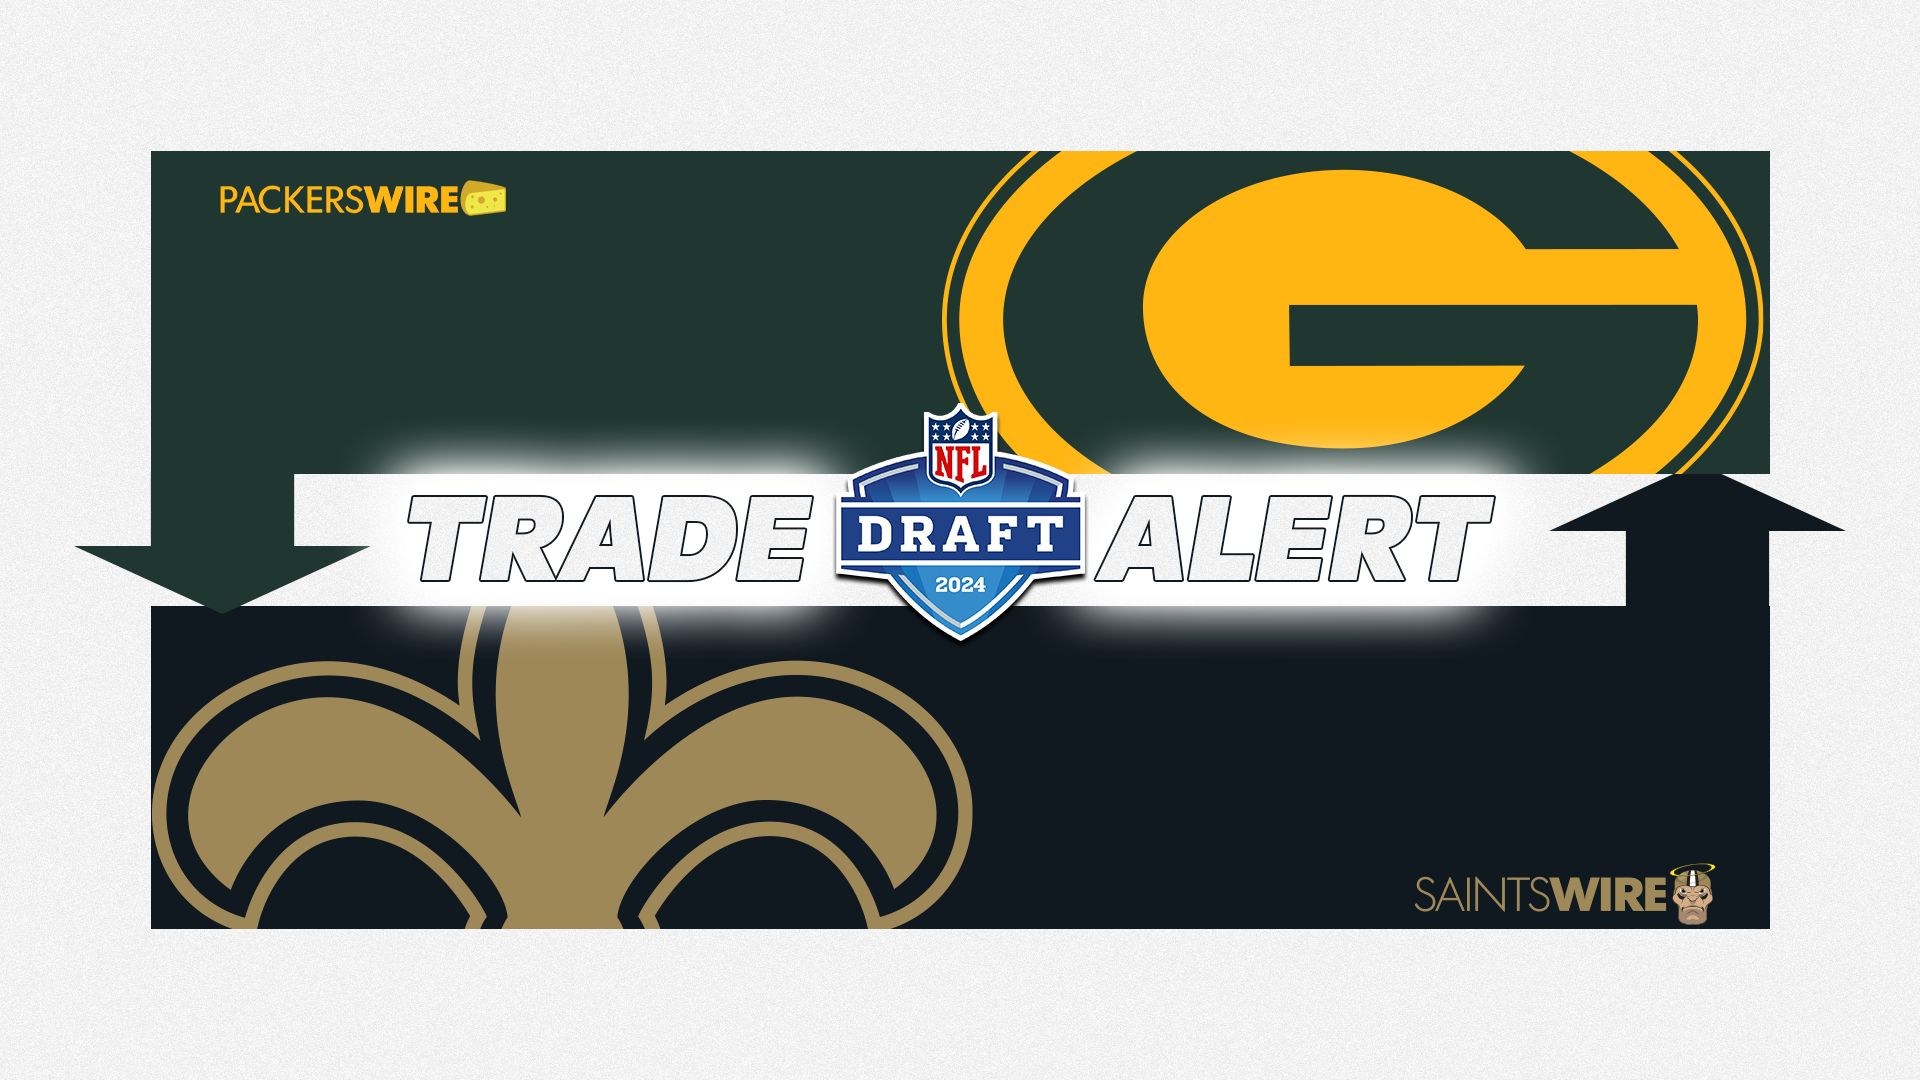 packers trade back with saints, gain two extra day 3 picks